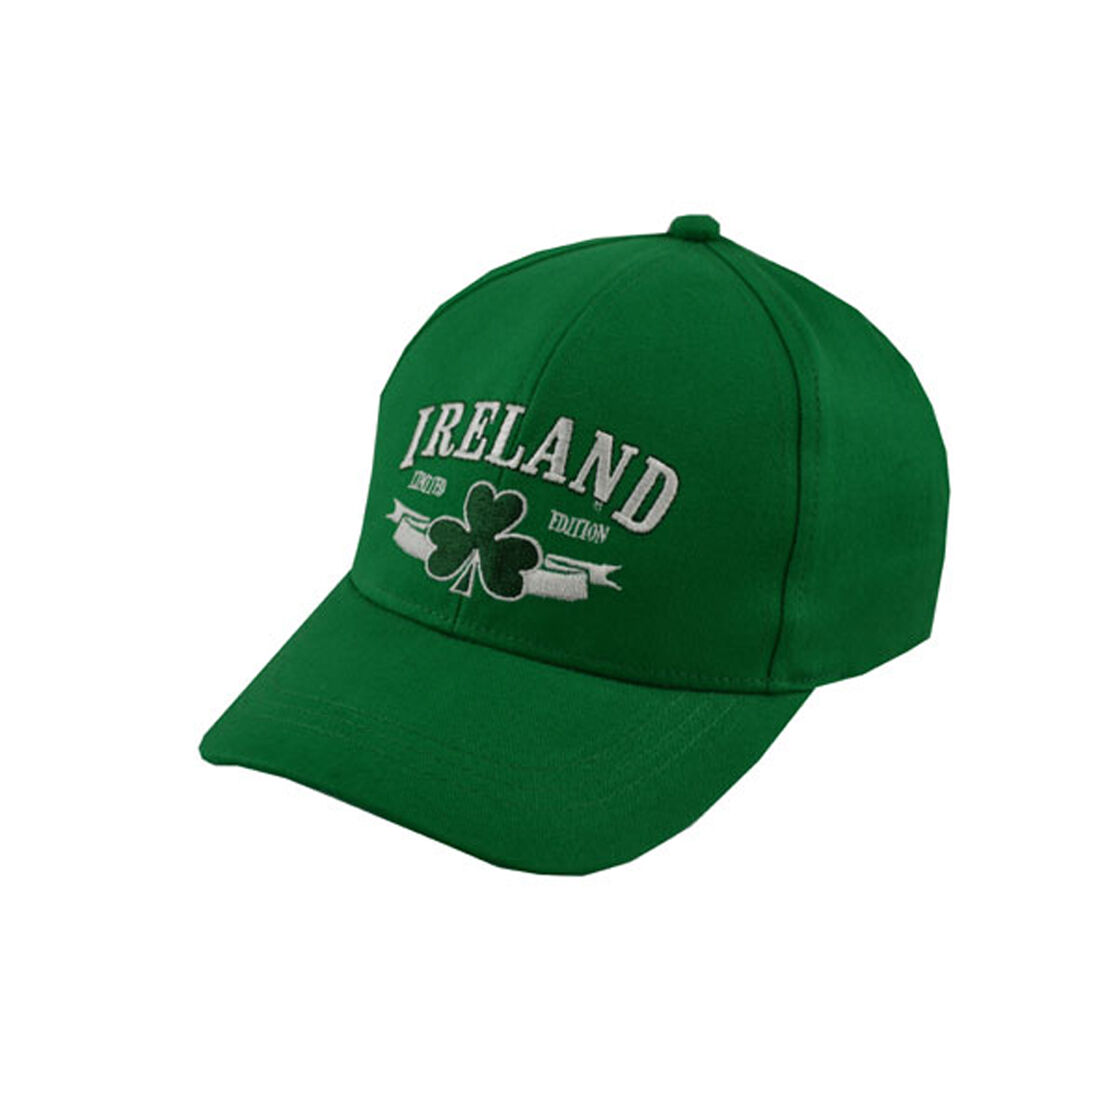 Green Colour Carrolls Irish Gifts Baseball Cap for Kids with Ireland Limited Edition 